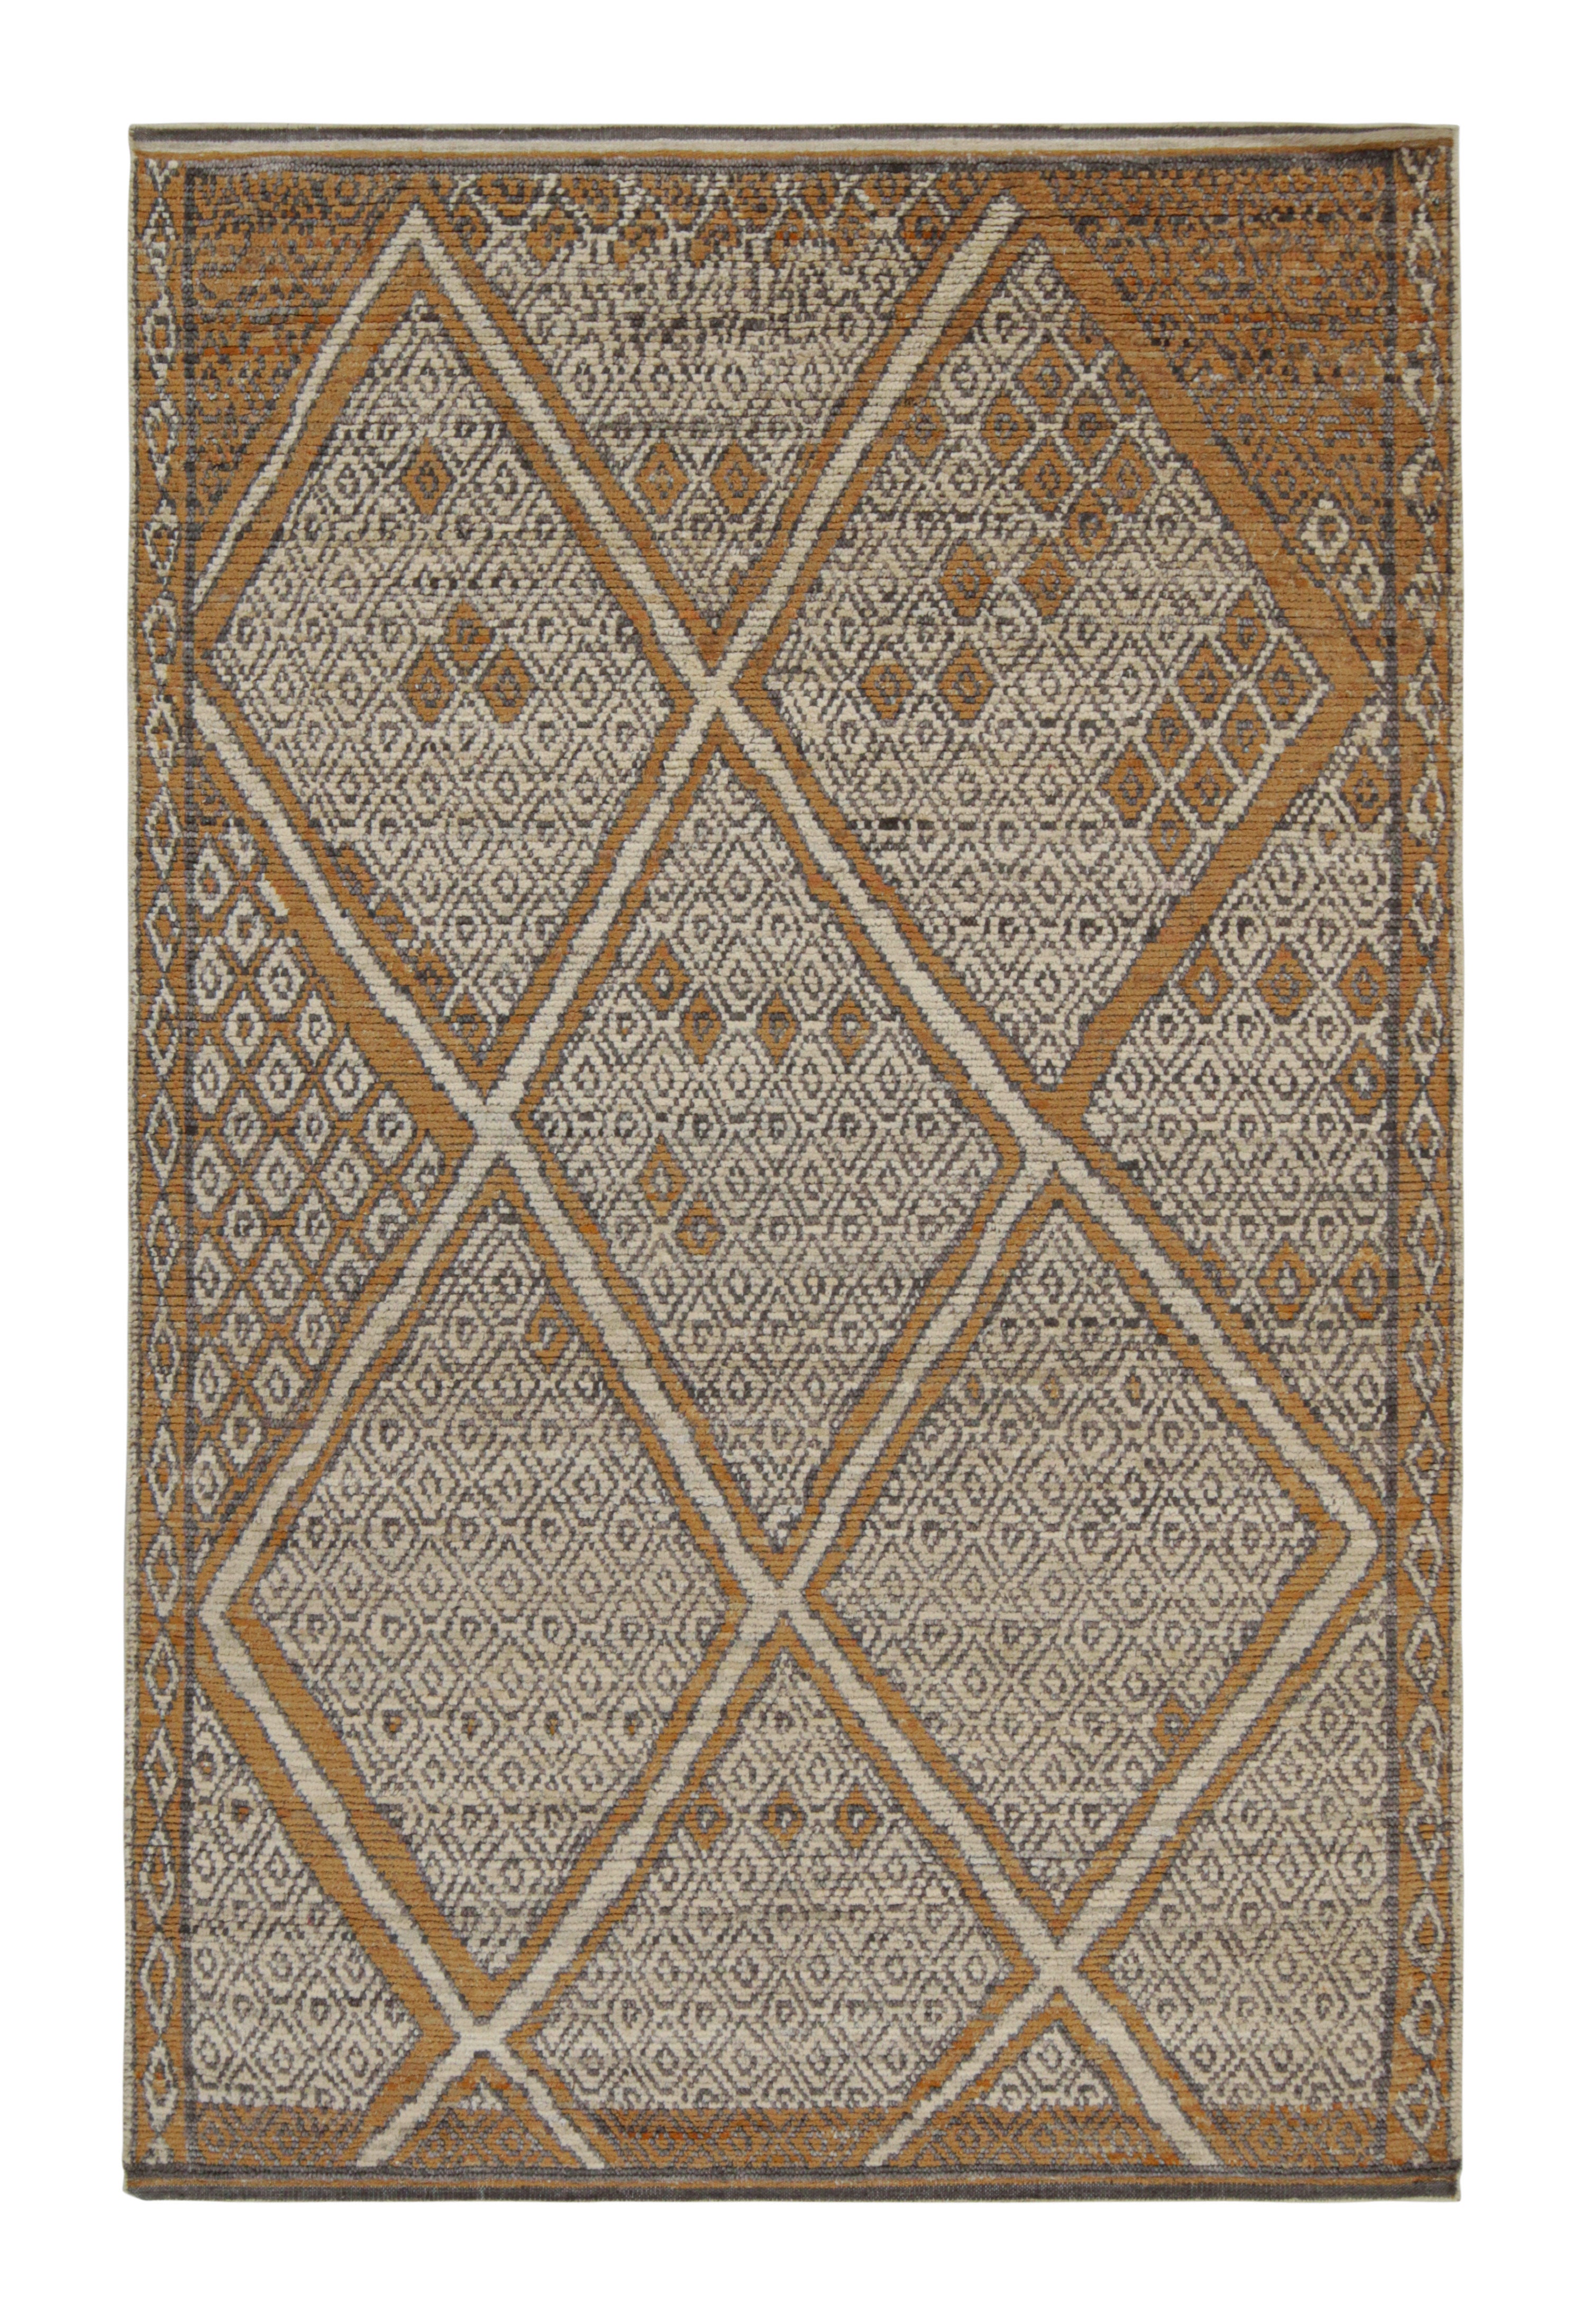 Rug & Kilim’s Moroccan Style Rug in Auburn Orange and White Diamond Patterns For Sale